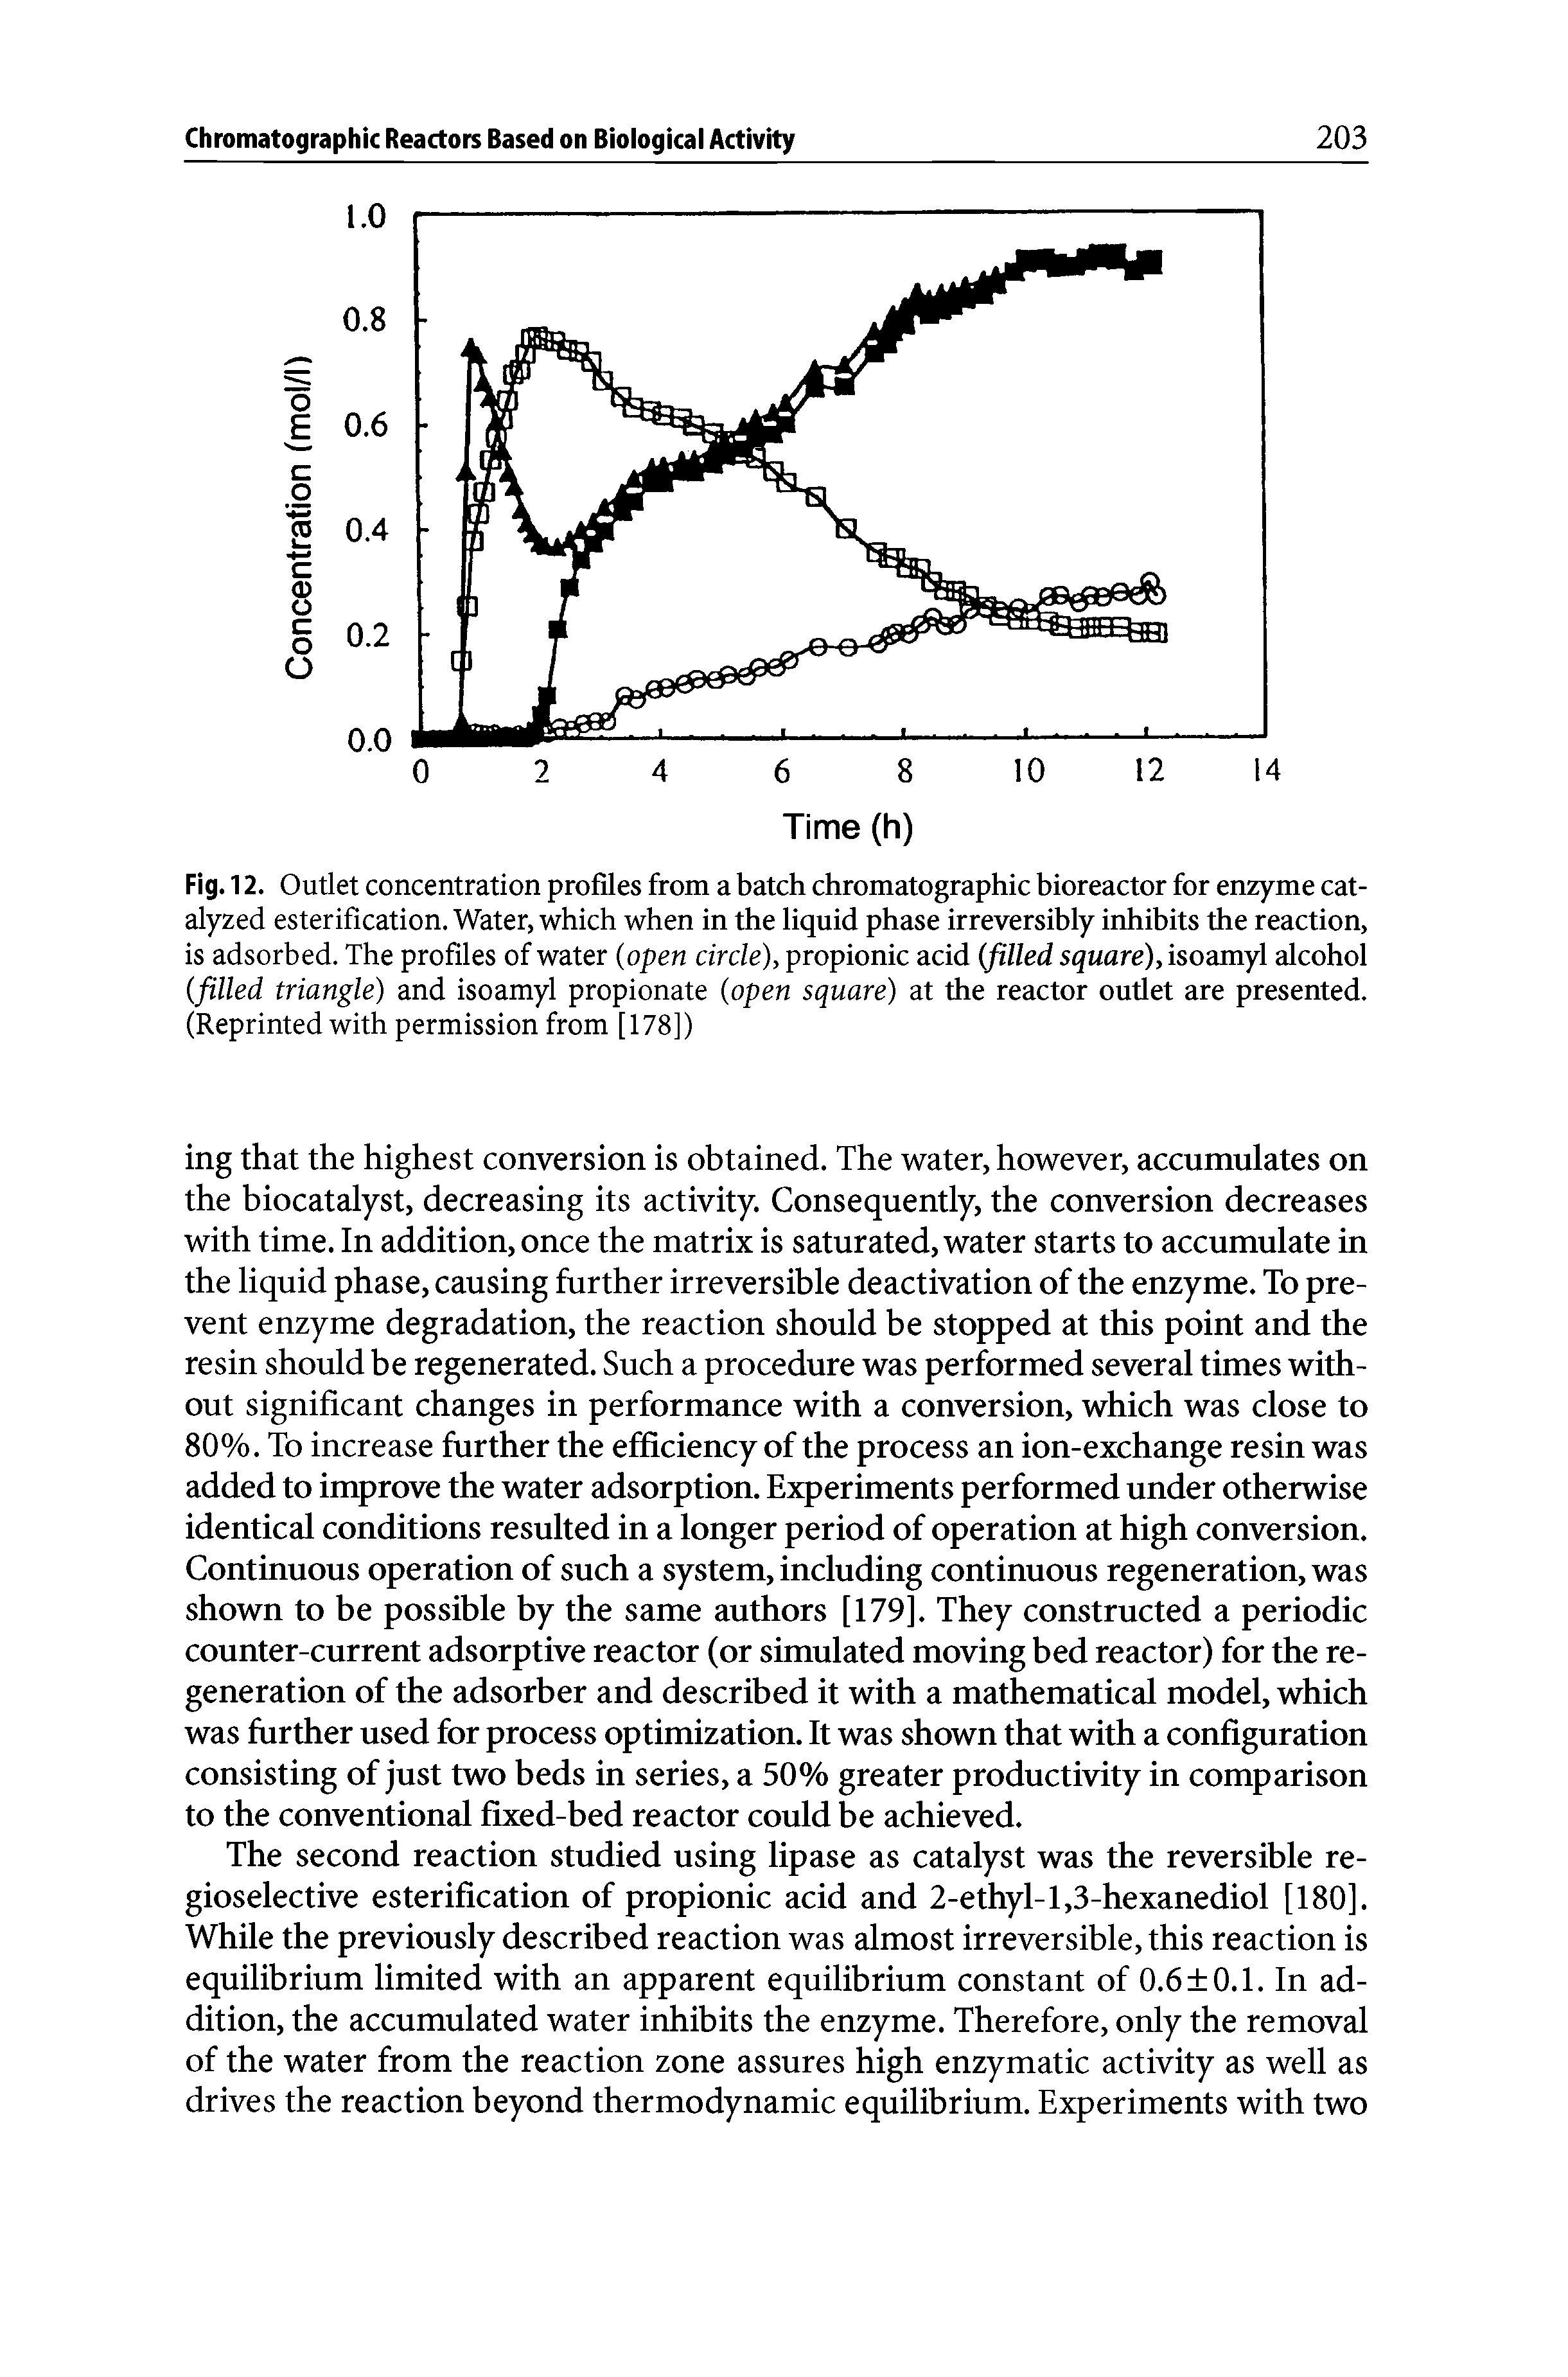 Fig. 12. Outlet concentration profiles from a batch chromatographic bioreactor for enzyme catalyzed esterification. Water, which when in the liquid phase irreversibly inhibits the reaction, is adsorbed. The profiles of water (open circle), propionic acid (filled square), isoamyl alcohol (filled triangle) and isoamyl propionate (open square) at the reactor outlet are presented. (Reprinted with permission from [178])...